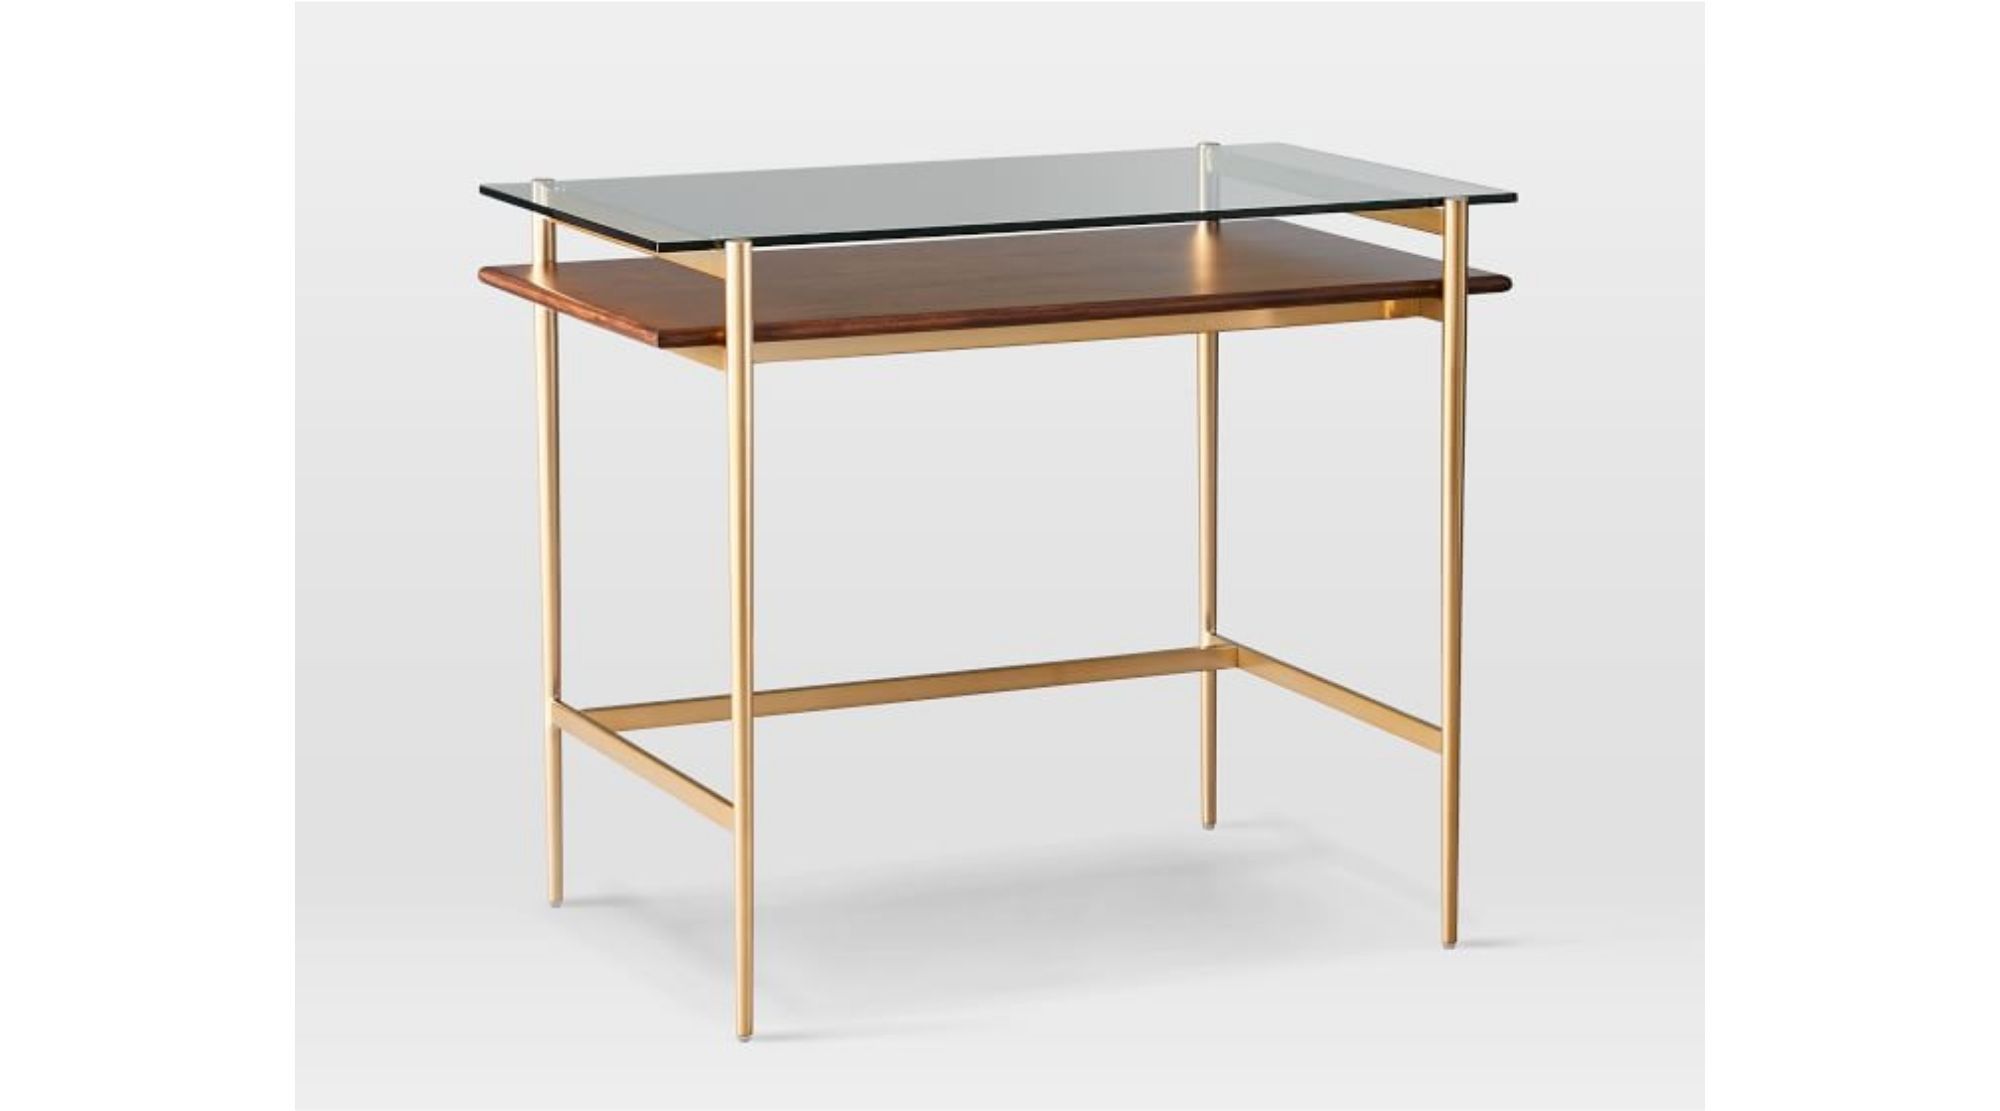 Mid-Century Art Display Mini Desk from West Elm that's perfect for small spaces